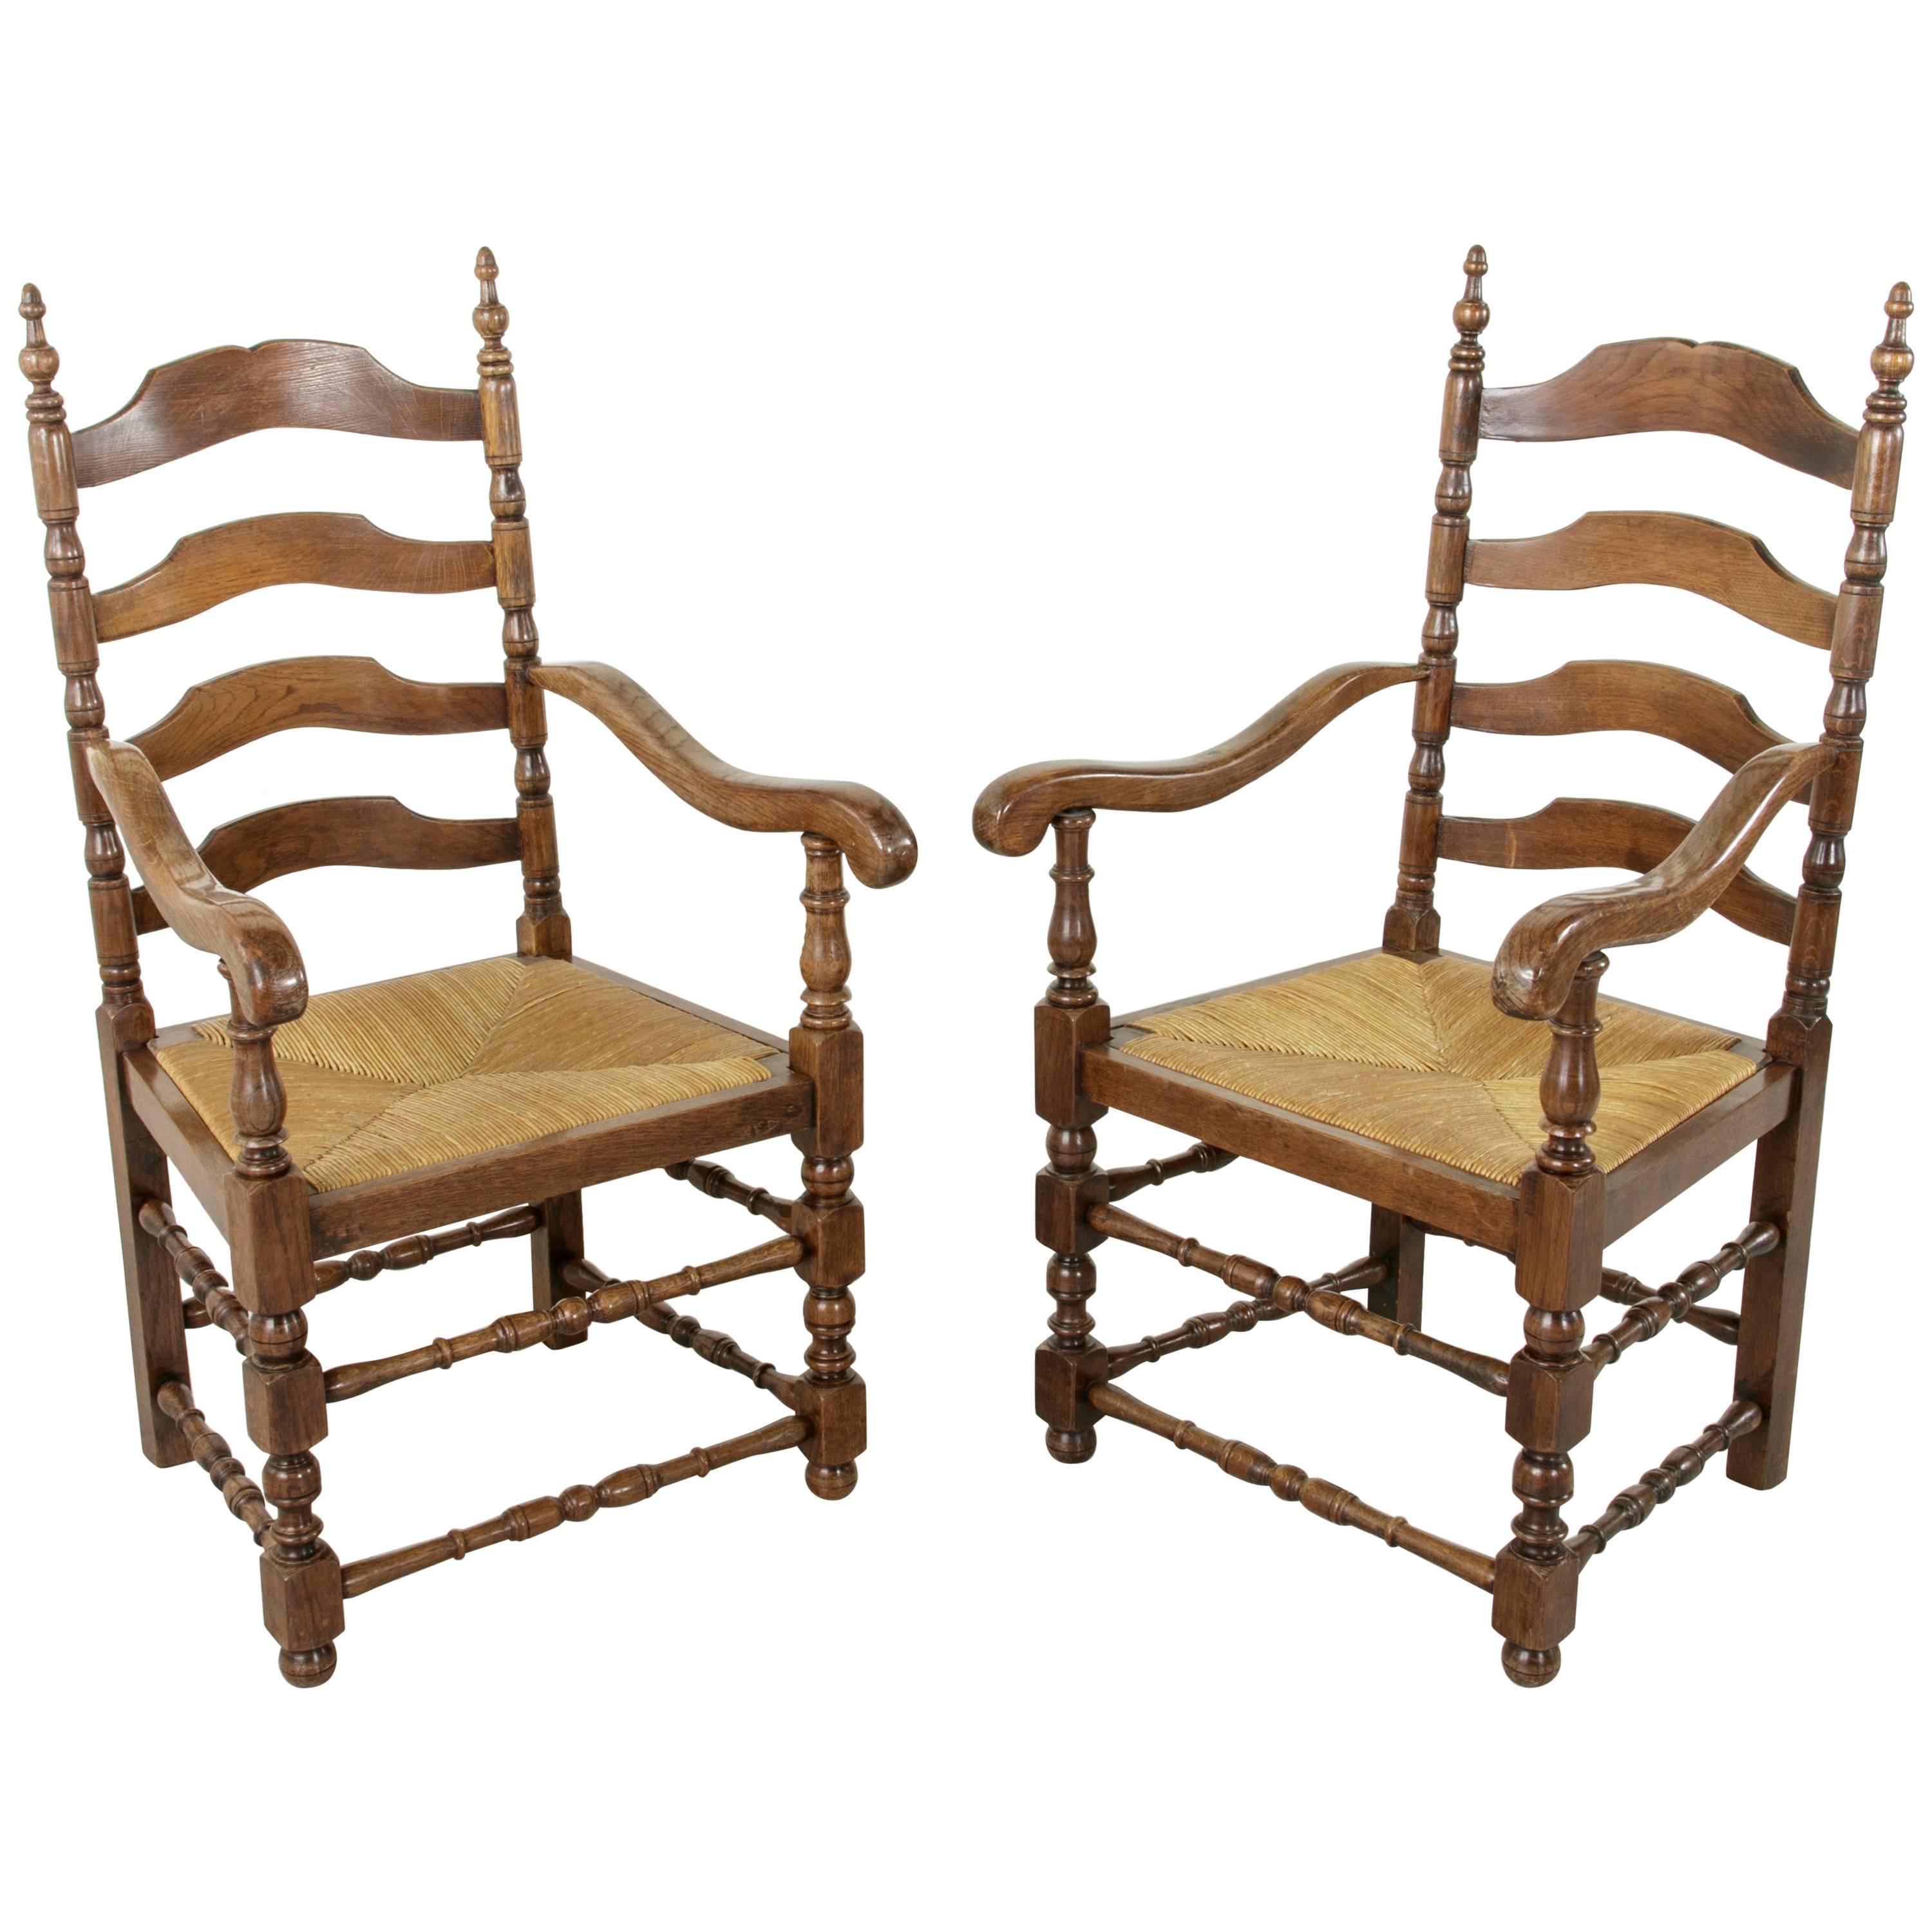 Pair of Louis Philippe Style French Oak Ladder Back Armchairs with Rush Seats